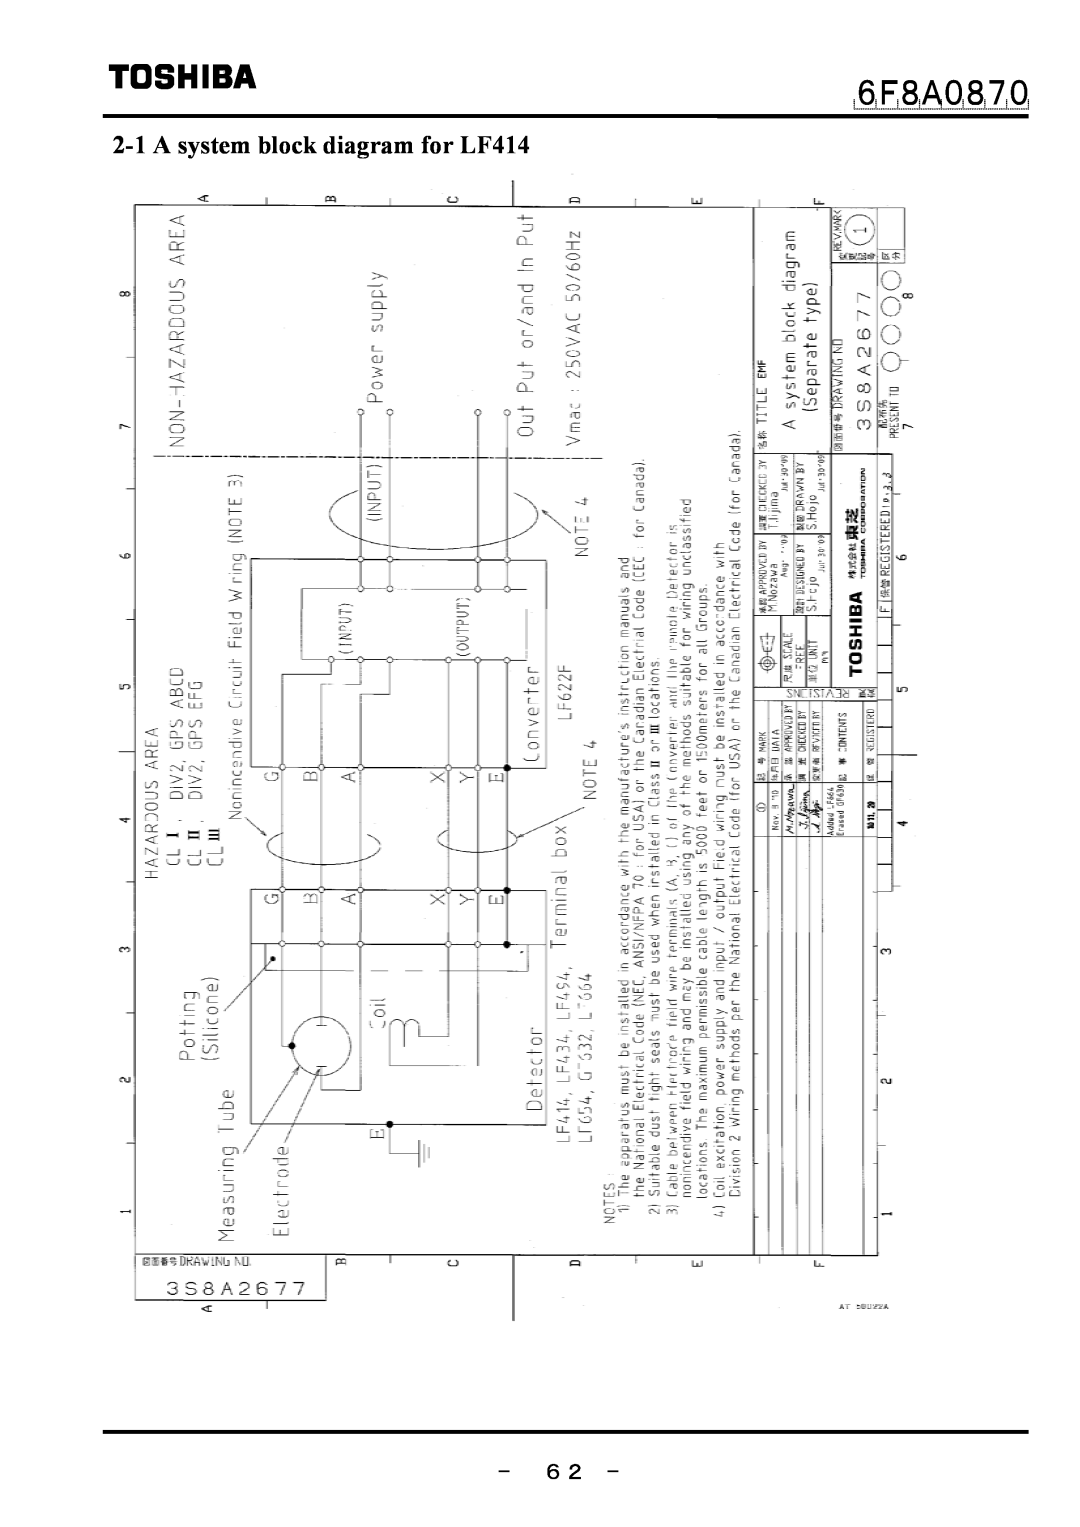 Toshiba manual A system block diagram for LF414, － ６２ －, ６Ｆ８Ａ０８７０ 